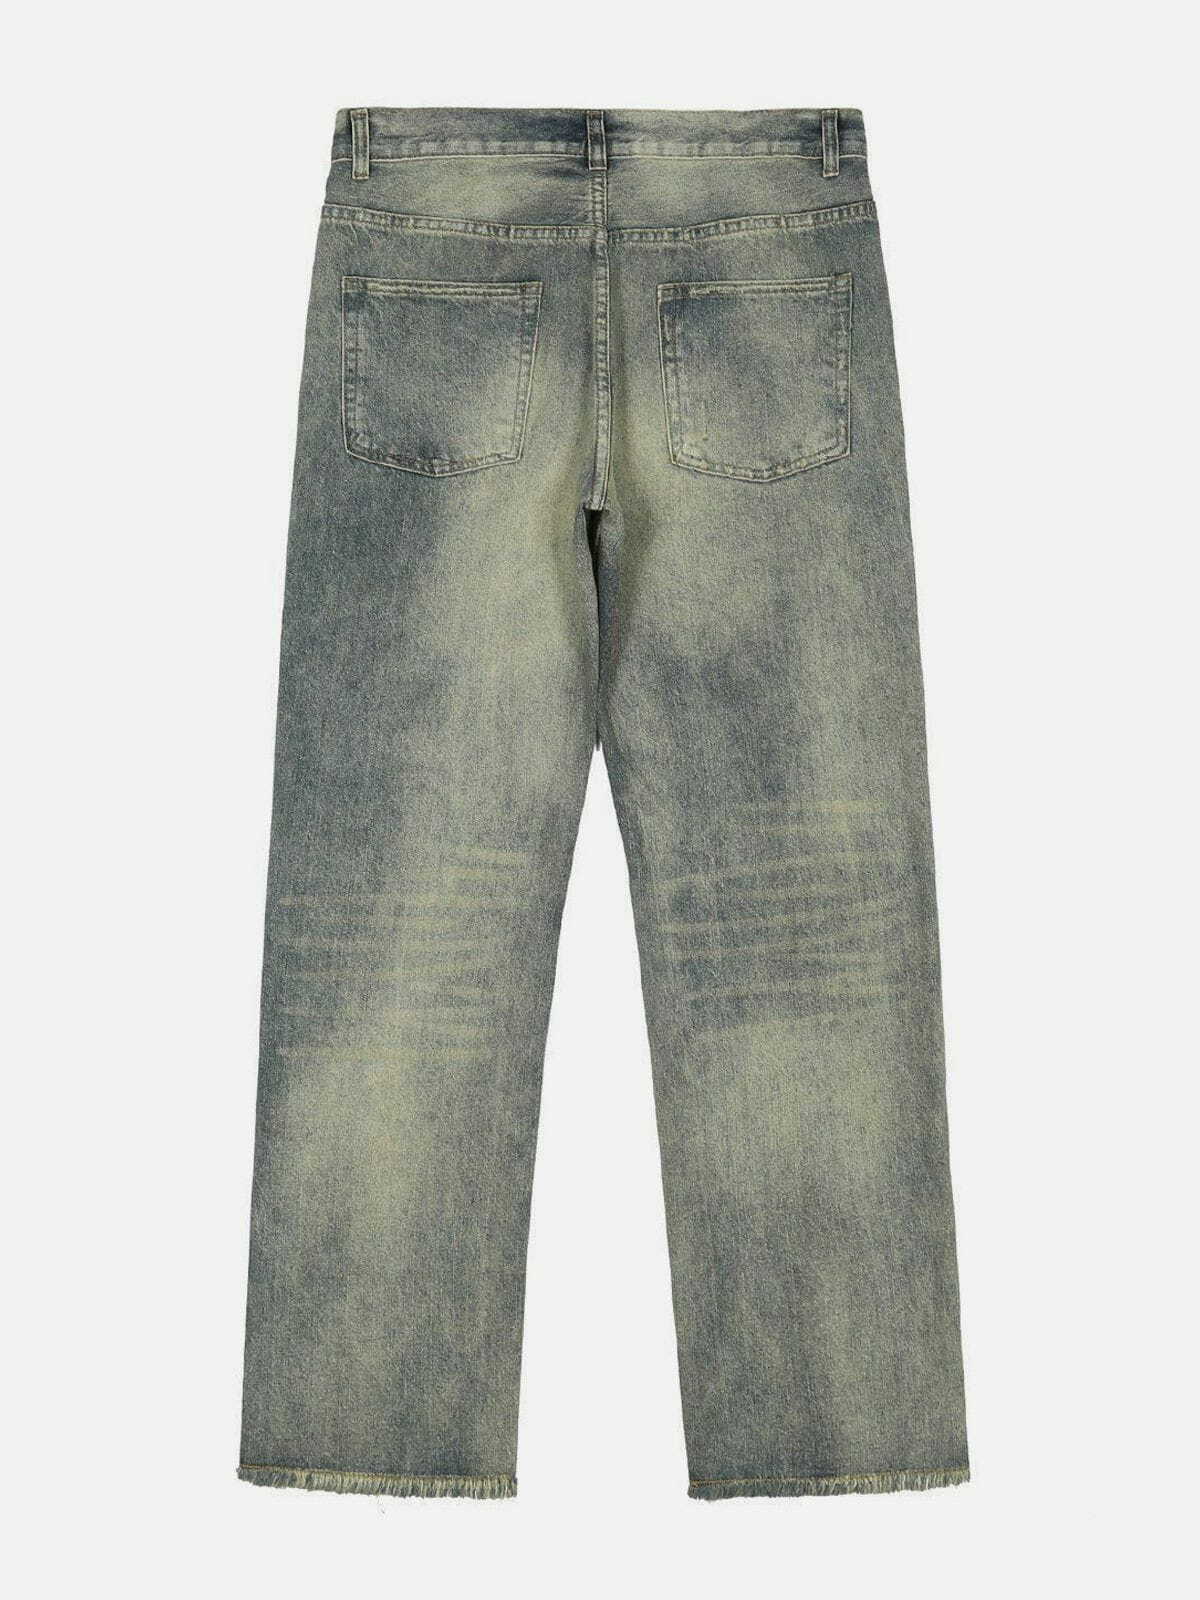 edgy washed hole jeans urban streetwear 8066